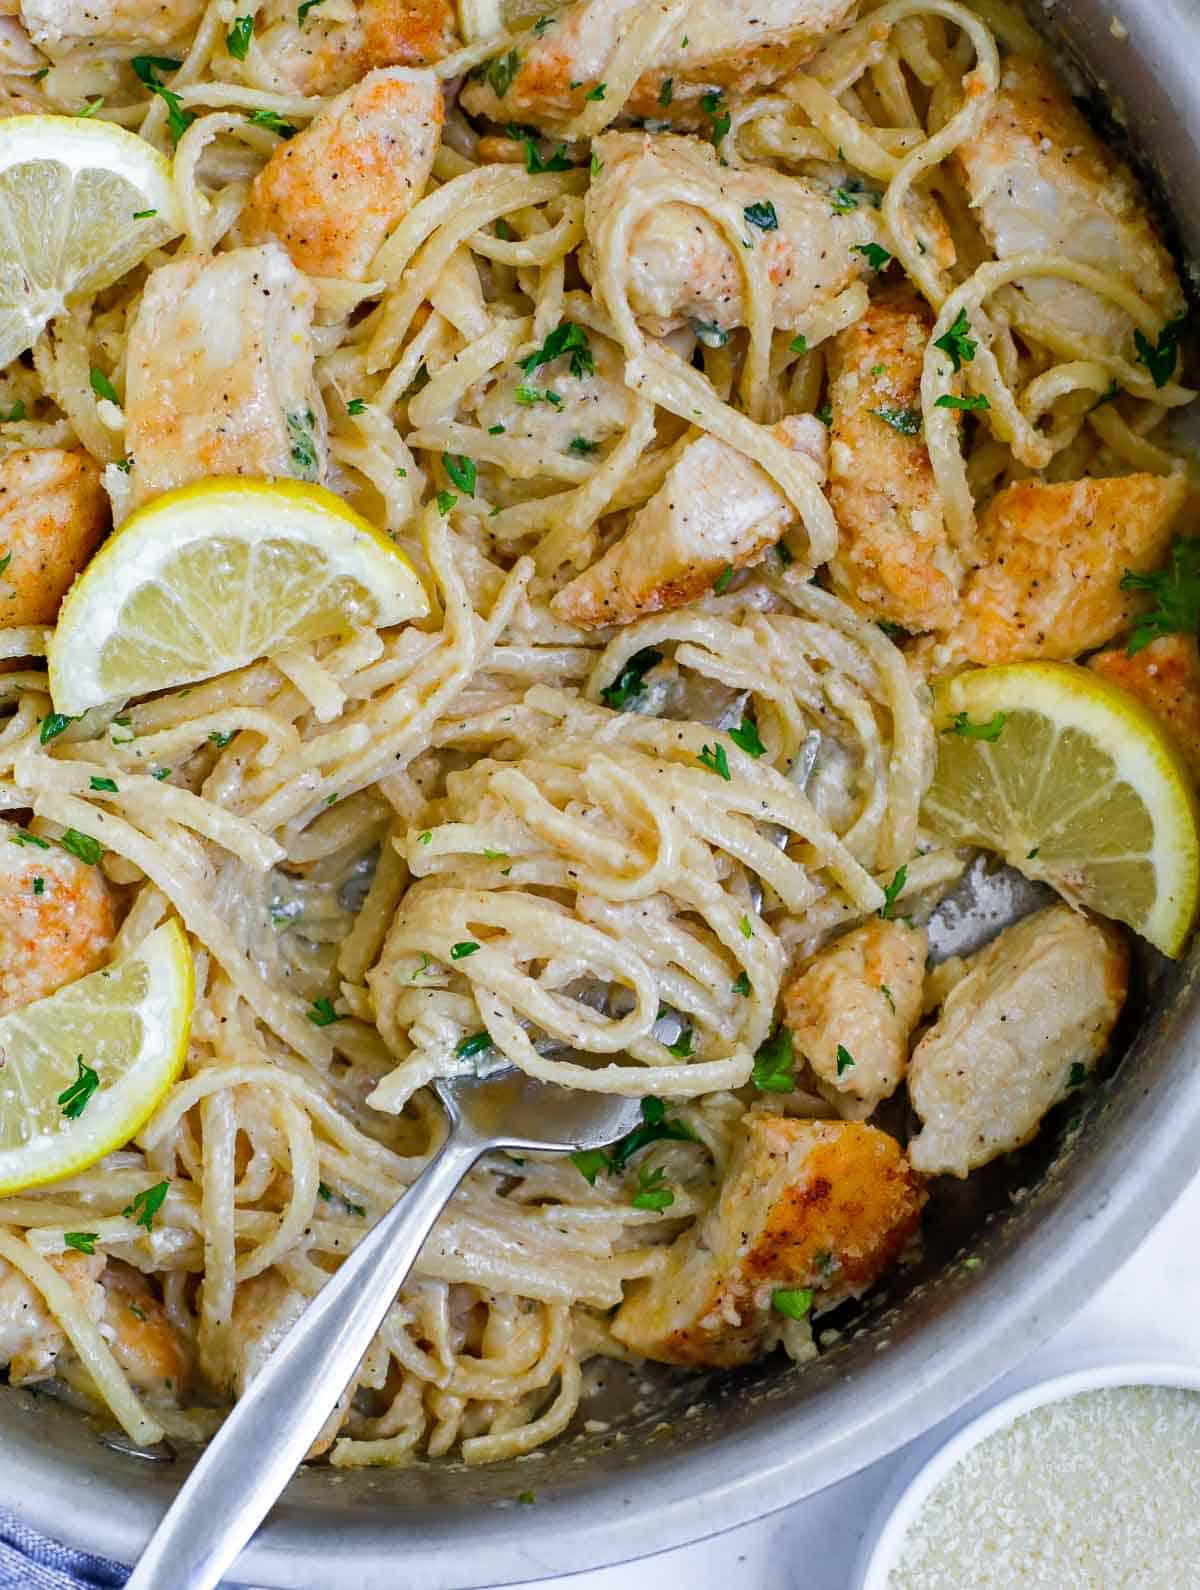 A fork filled with linguine recipes for chicken with lemon and a creamy sauce.